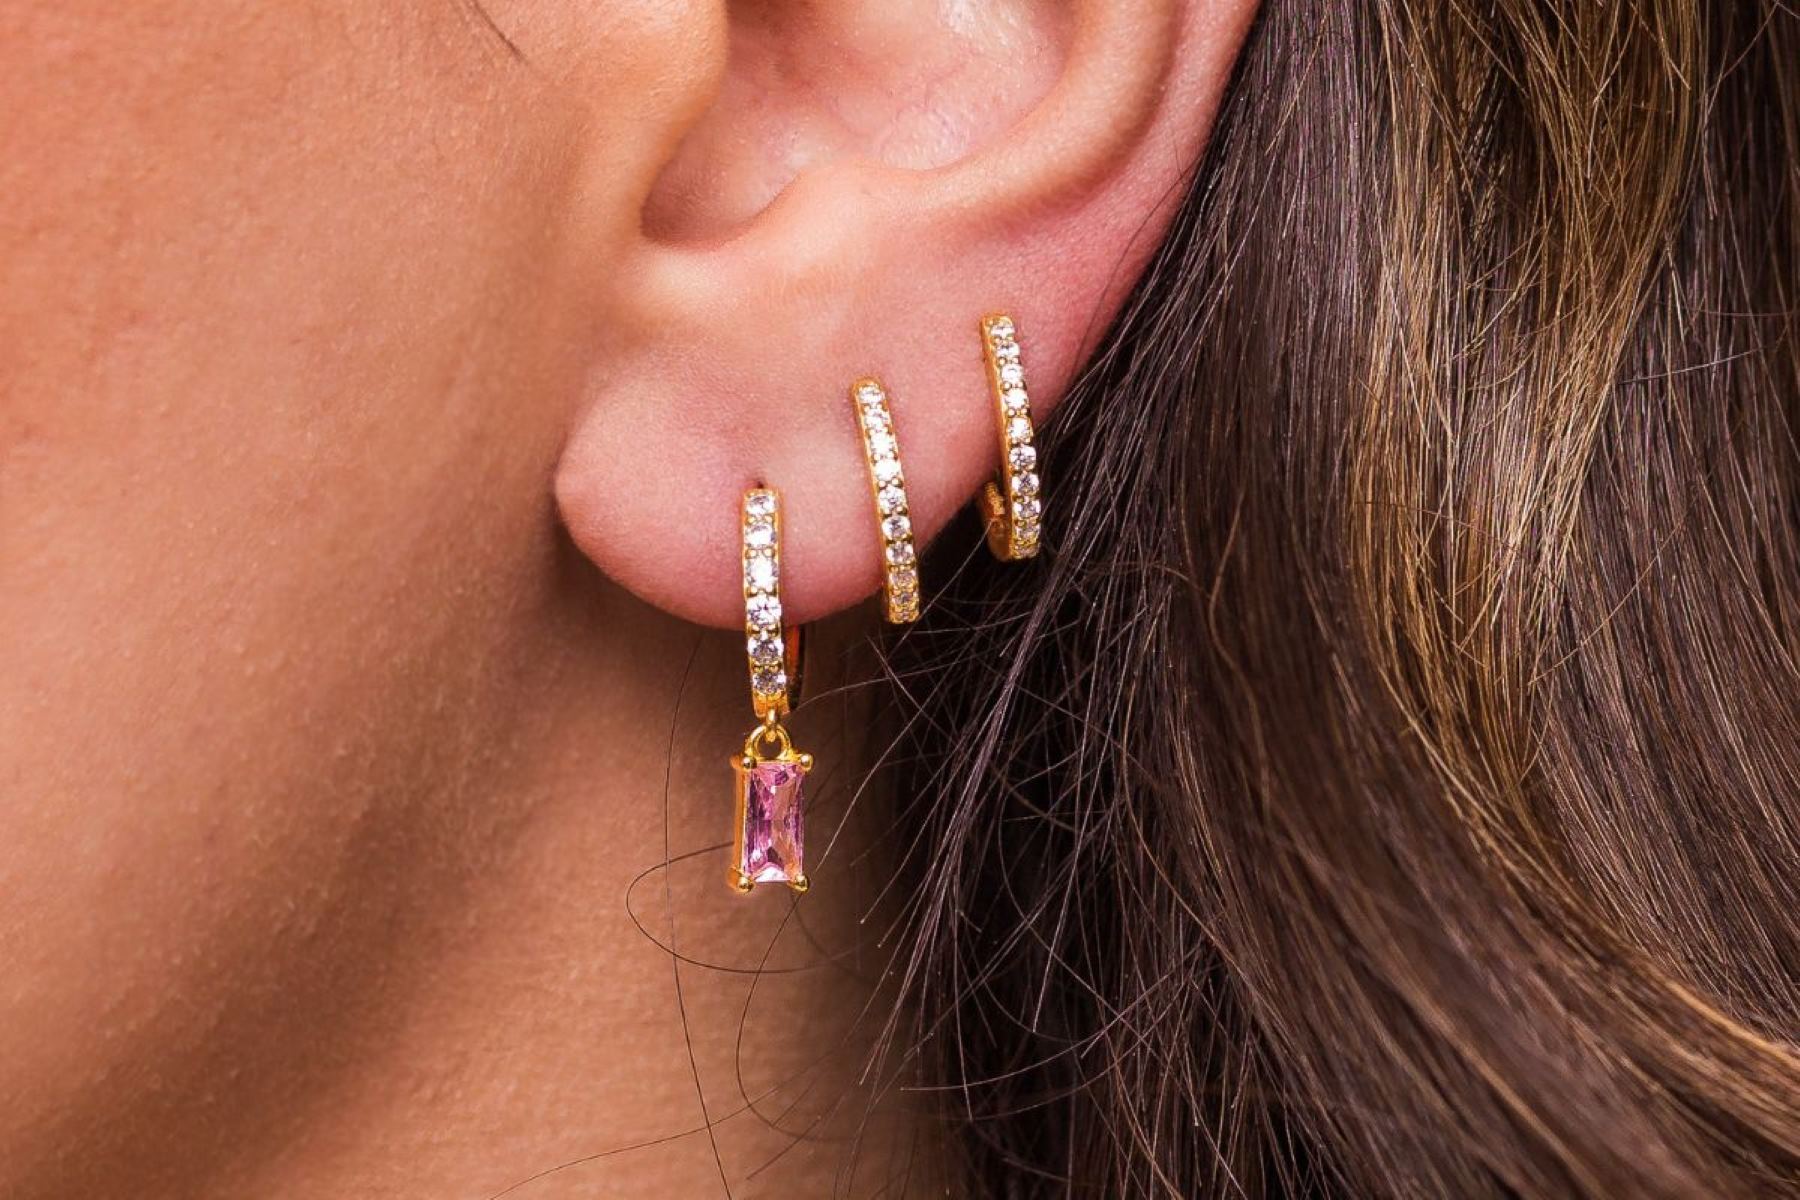 Essential Tips For Perfectly Healing And Maintaining Ear Piercings